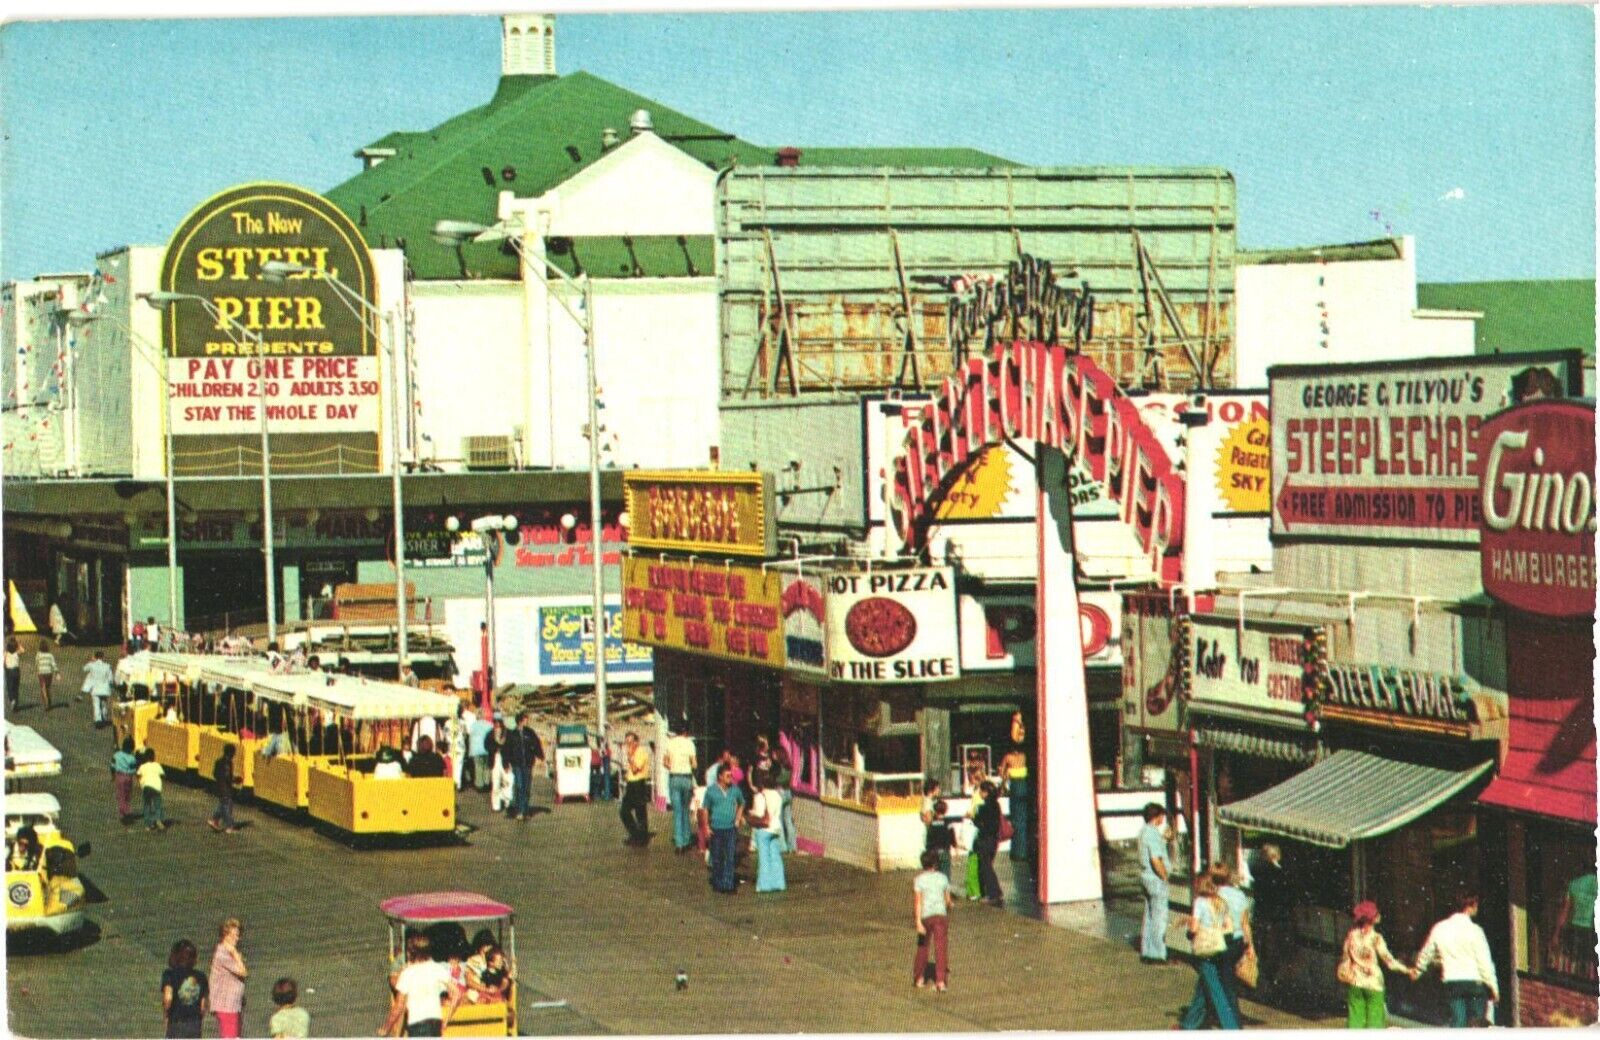 A View of The World Famous Boardwalk, Atlantic City, New Jersey Postcard